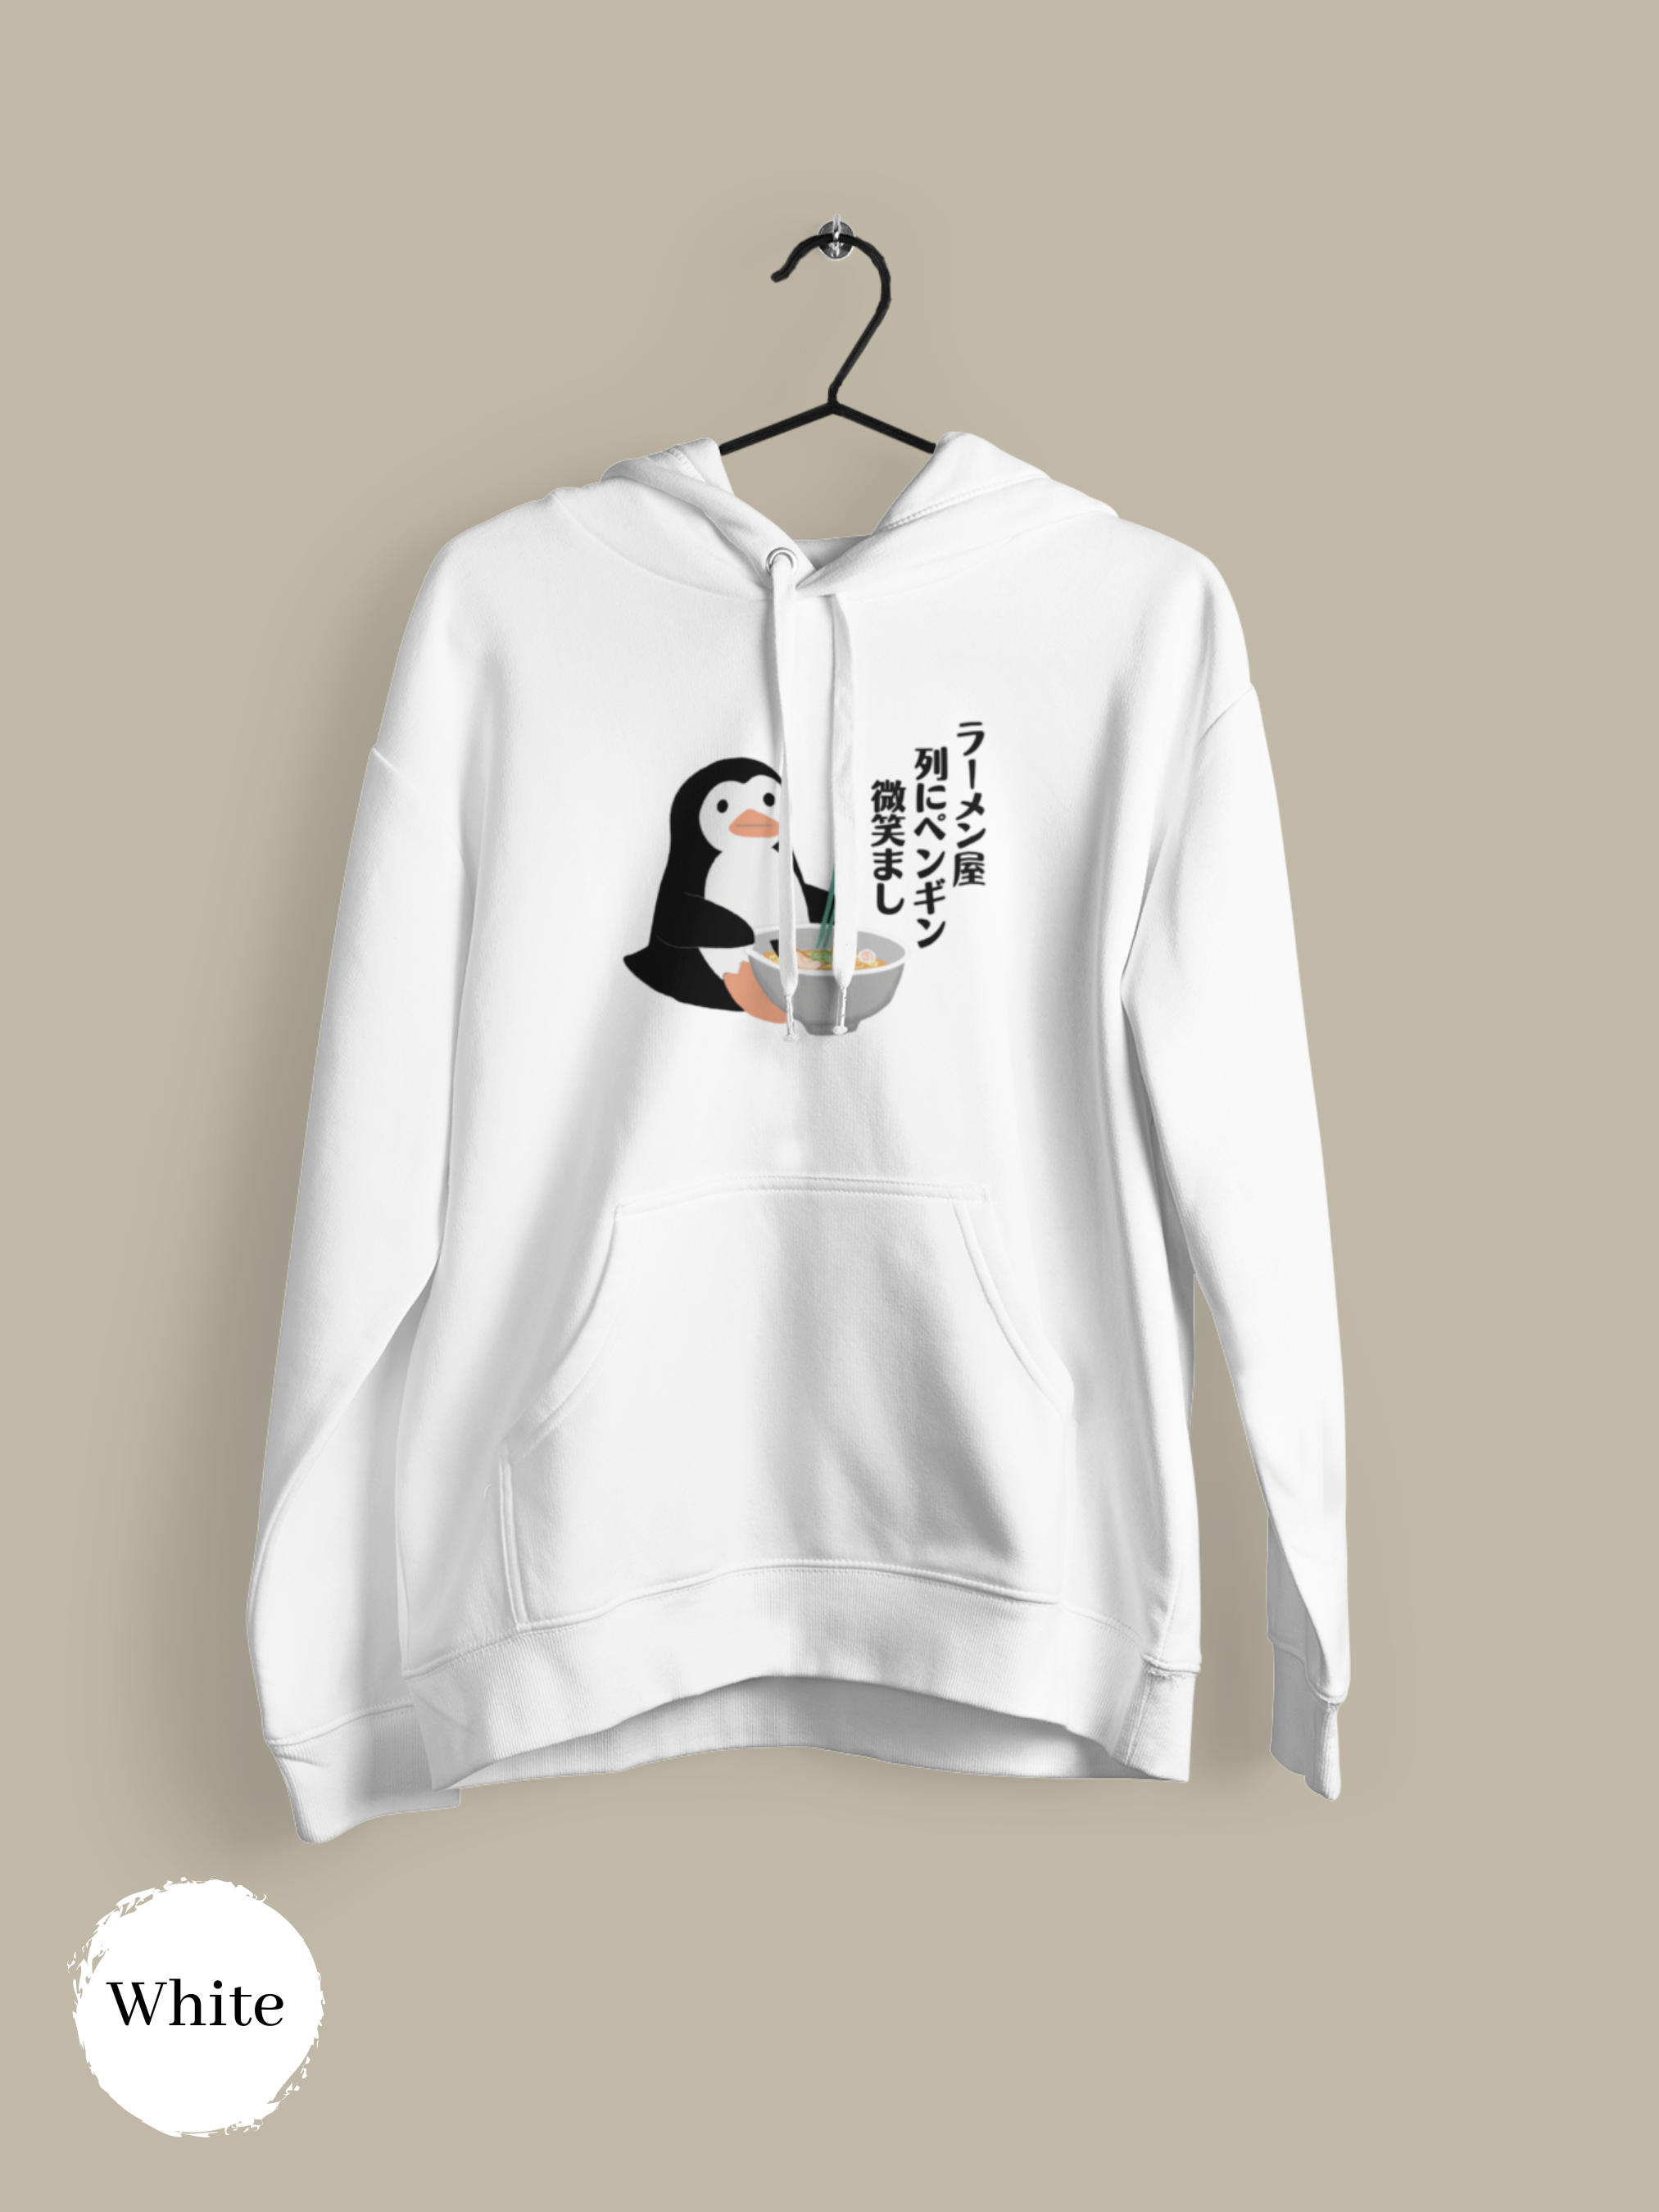 Ramen Hoodie: Haiku Edition - A Playful Penguin and Delicious Ramen Art on a Cozy Foodie Hoodie